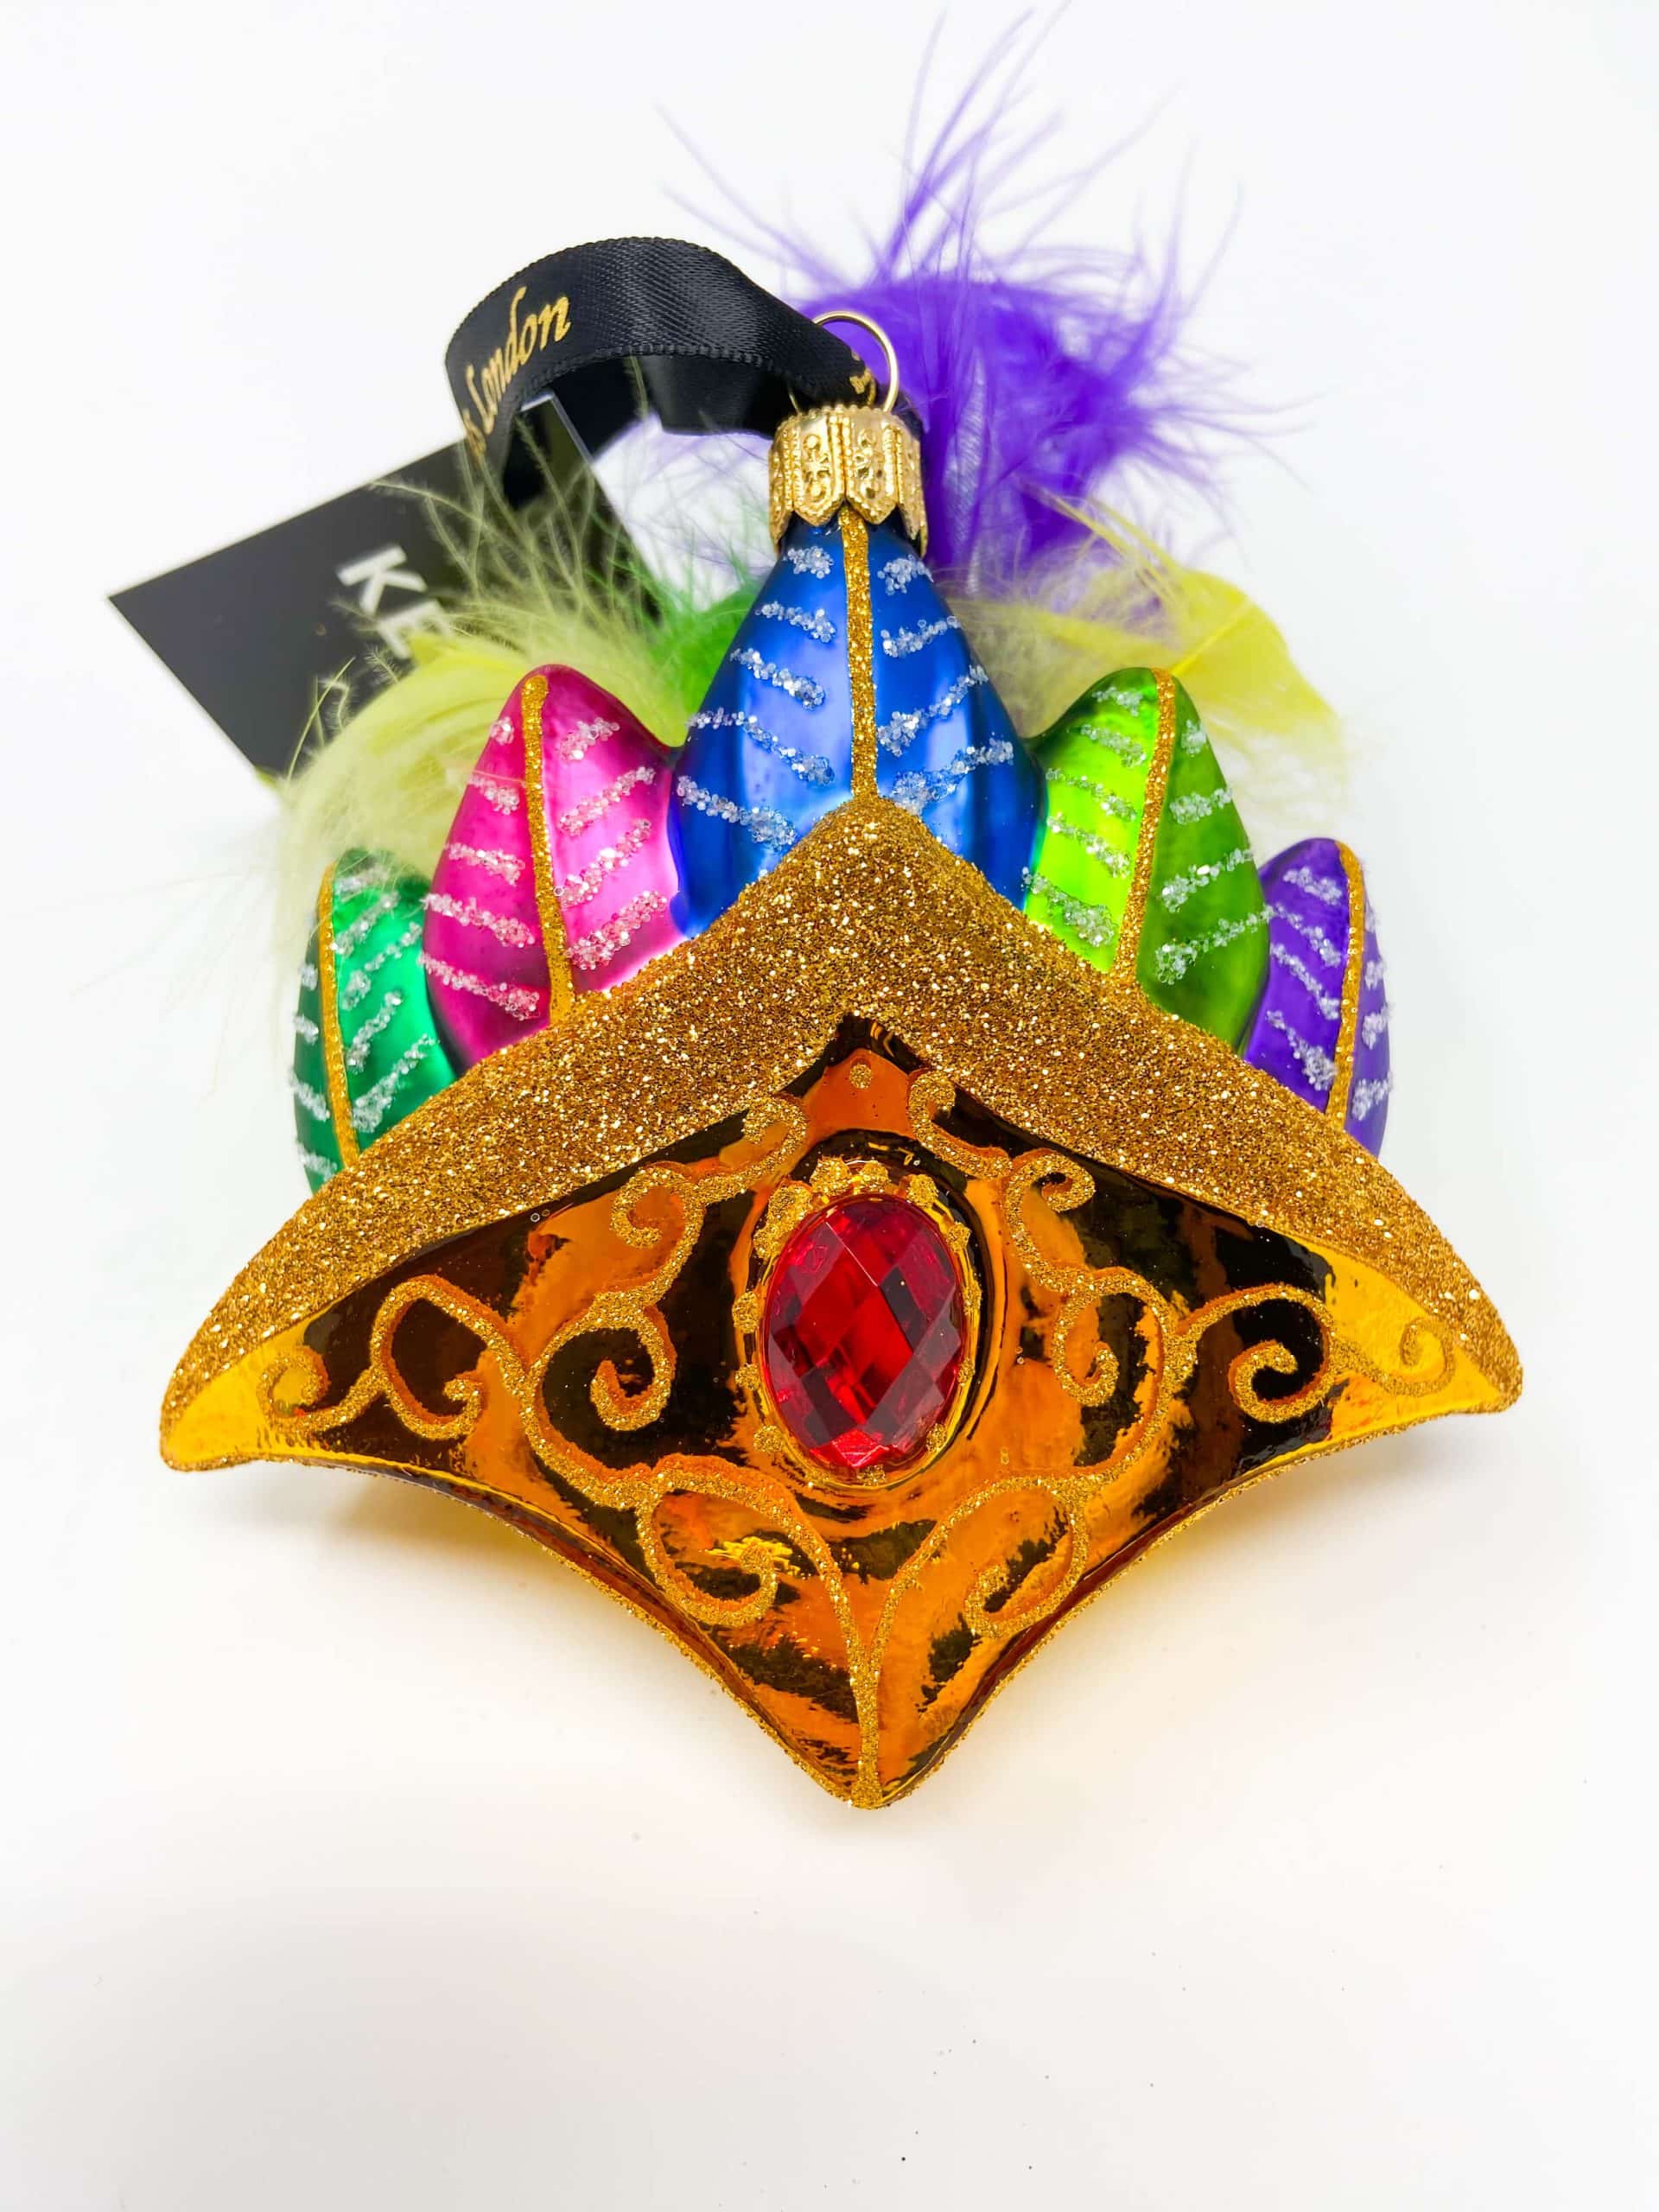 brazilian venetian carnival crown ornament. Fetures gold crown with a large faux gemstone in the center. Surrounded by real and glass feathers in different colors. Saturated colors.